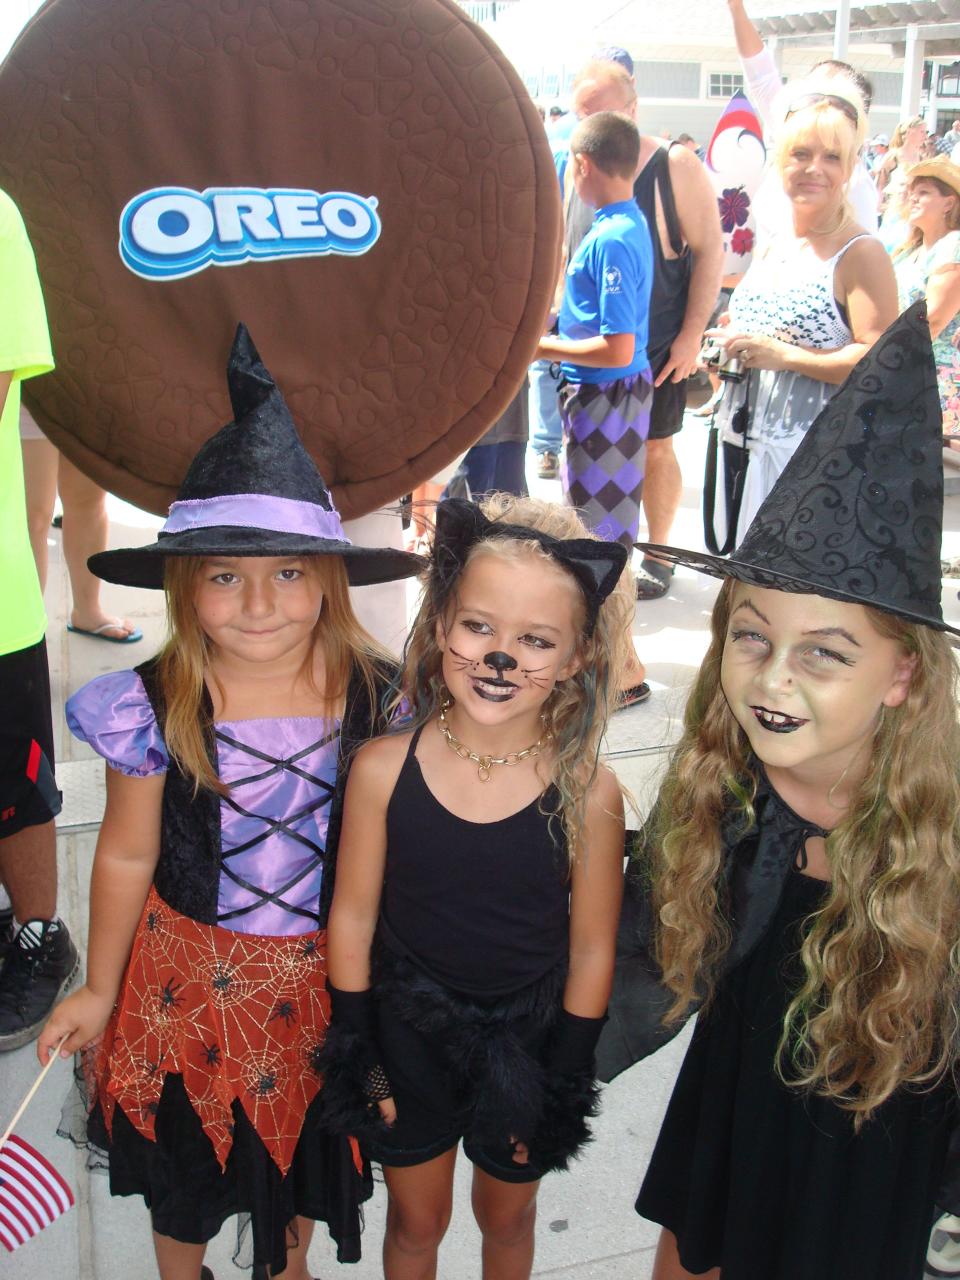 The Hampton Beach Children's Festival features a giant costume parade on Ocean Boulevard. The parade will take place at 11 a.m. on Friday, Aug. 18.